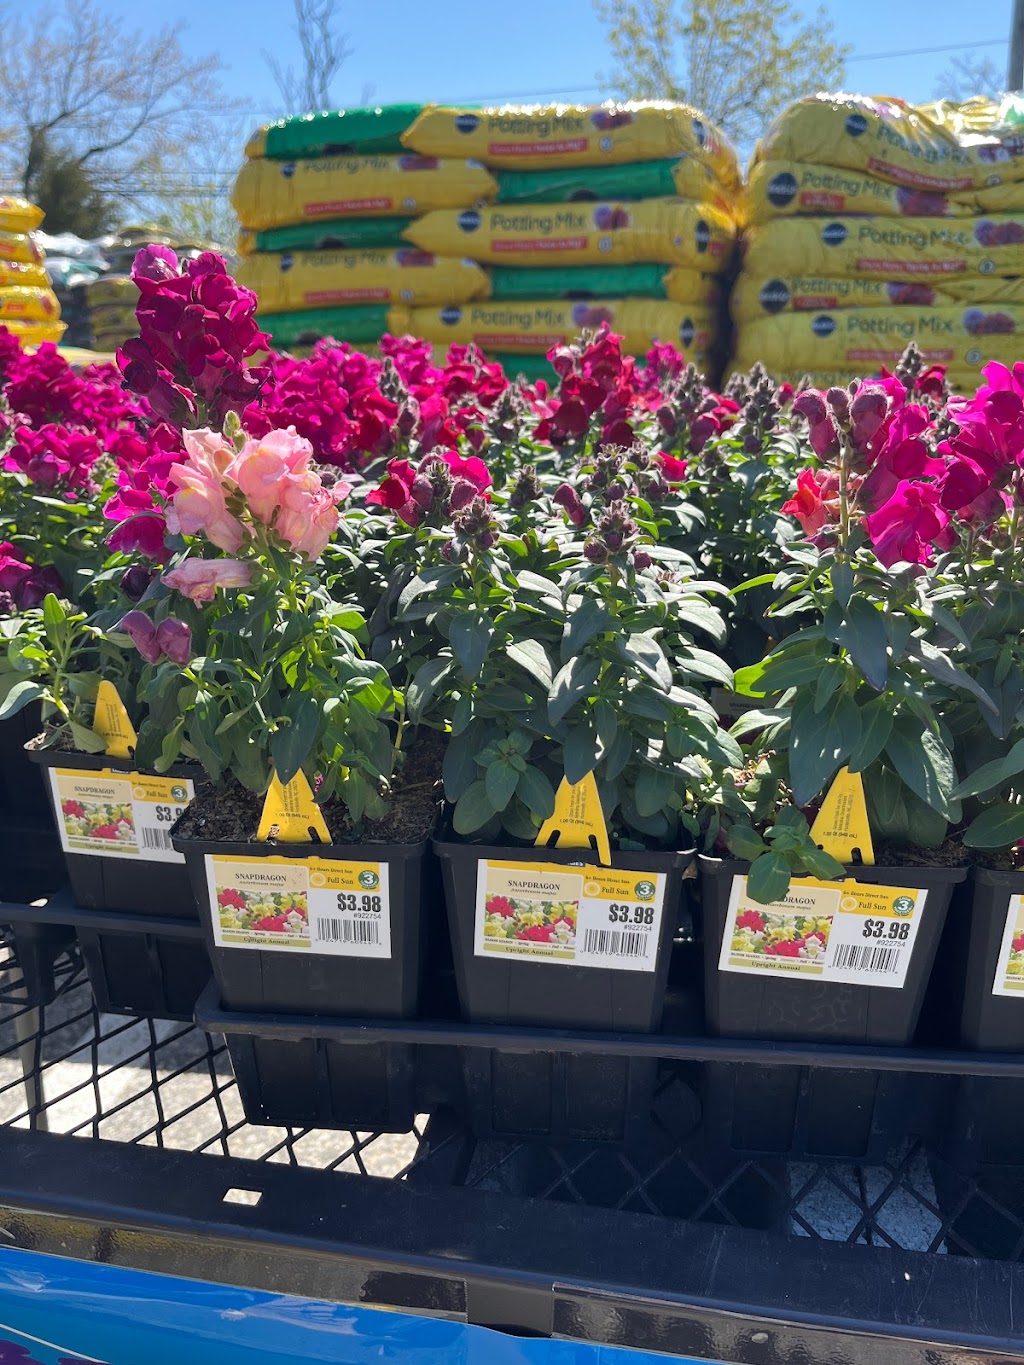 Lowes Garden Center | 5005 Edgmont Ave, Brookhaven, PA 19015 | Phone: (610) 990-8186